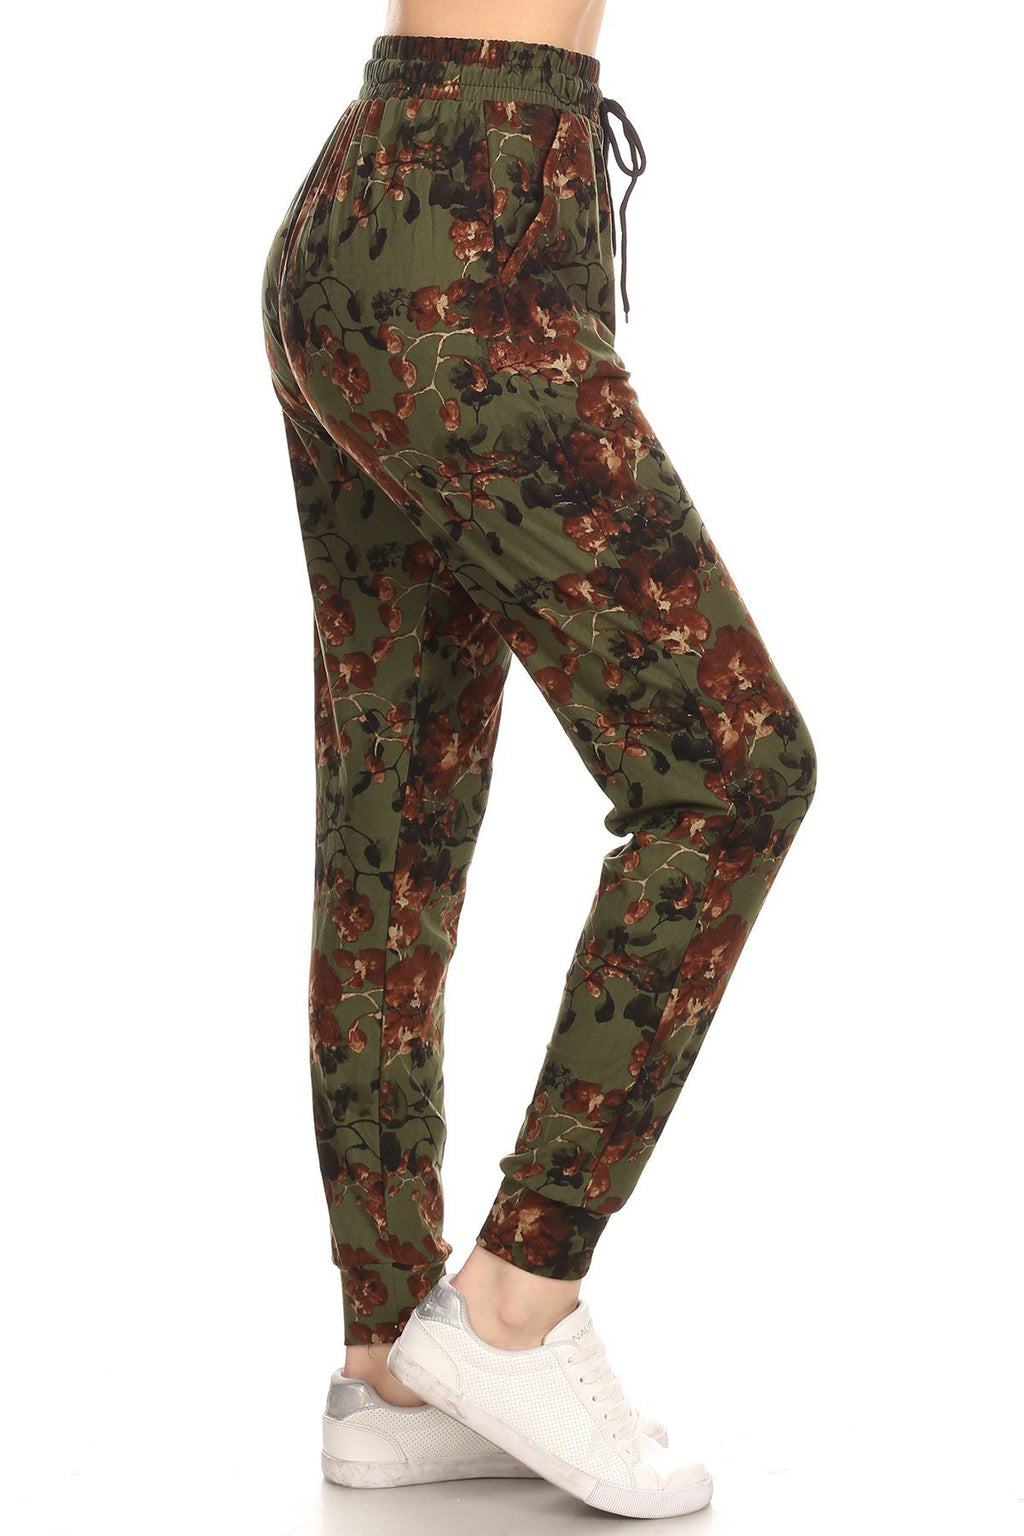 GREEN  Floral printed joggers with solid trim, drawstring waistband, waist pockets, and cuffed hems